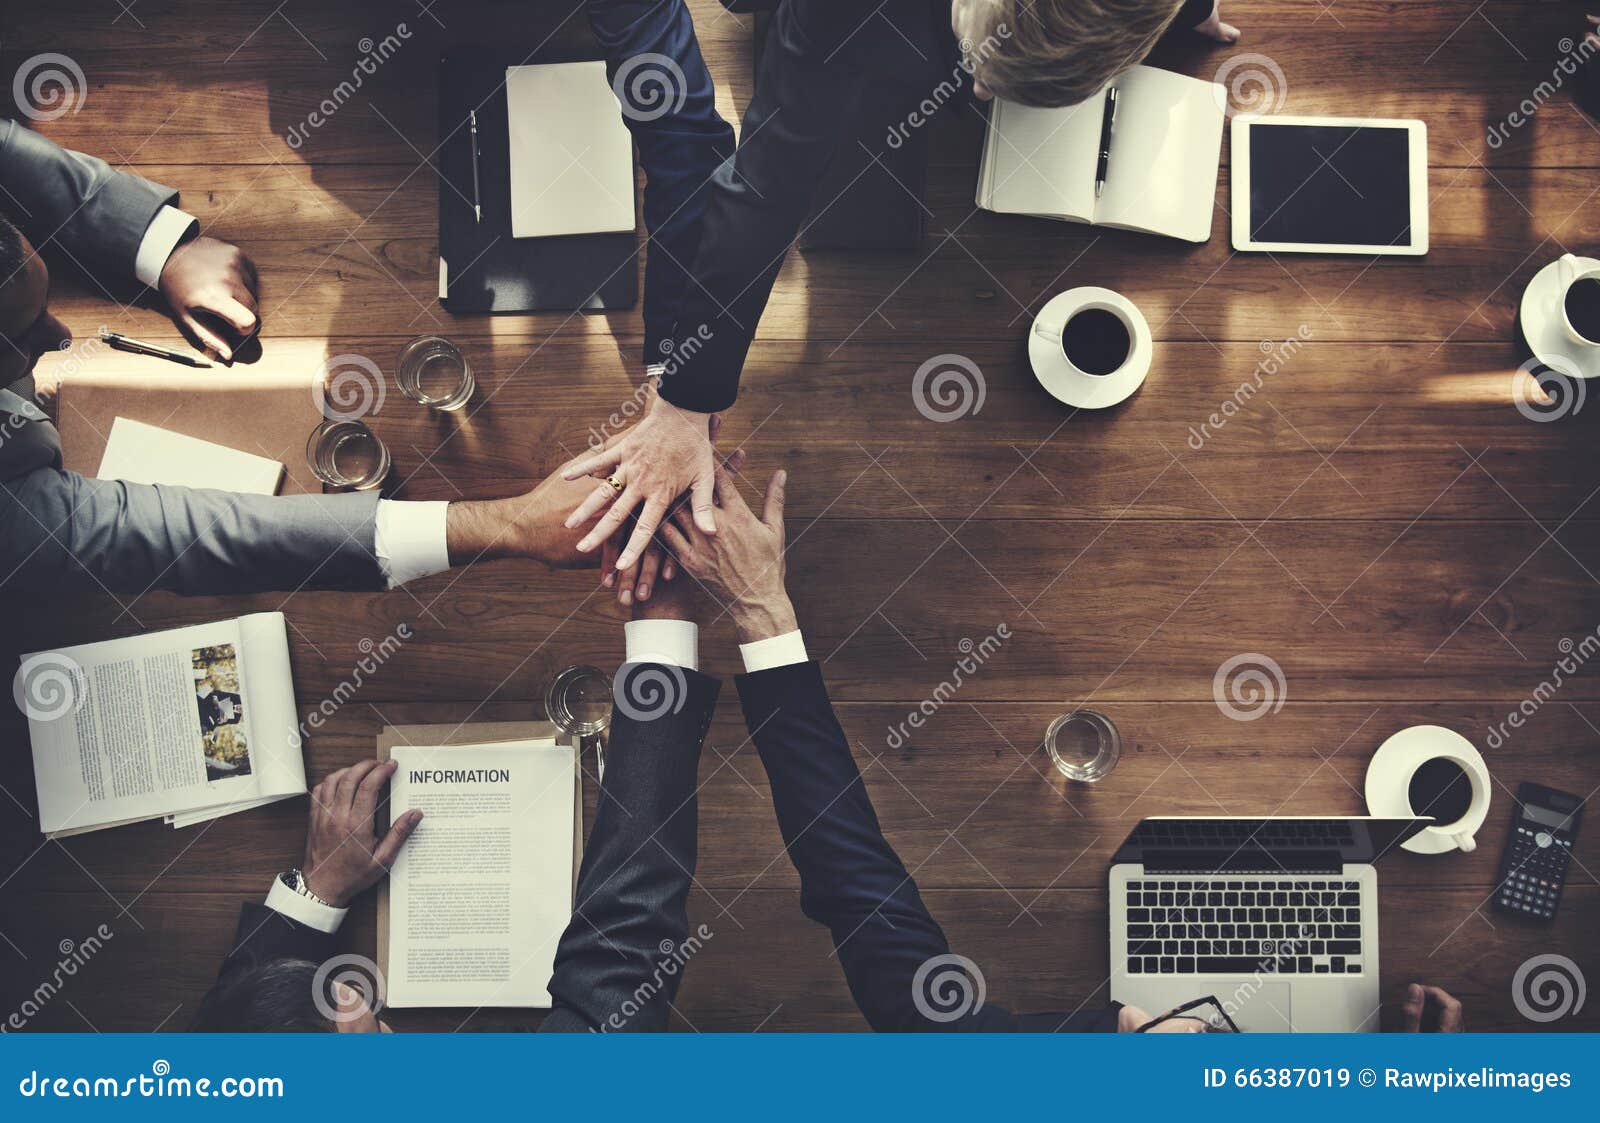 business people teamwork collaboration relation concept